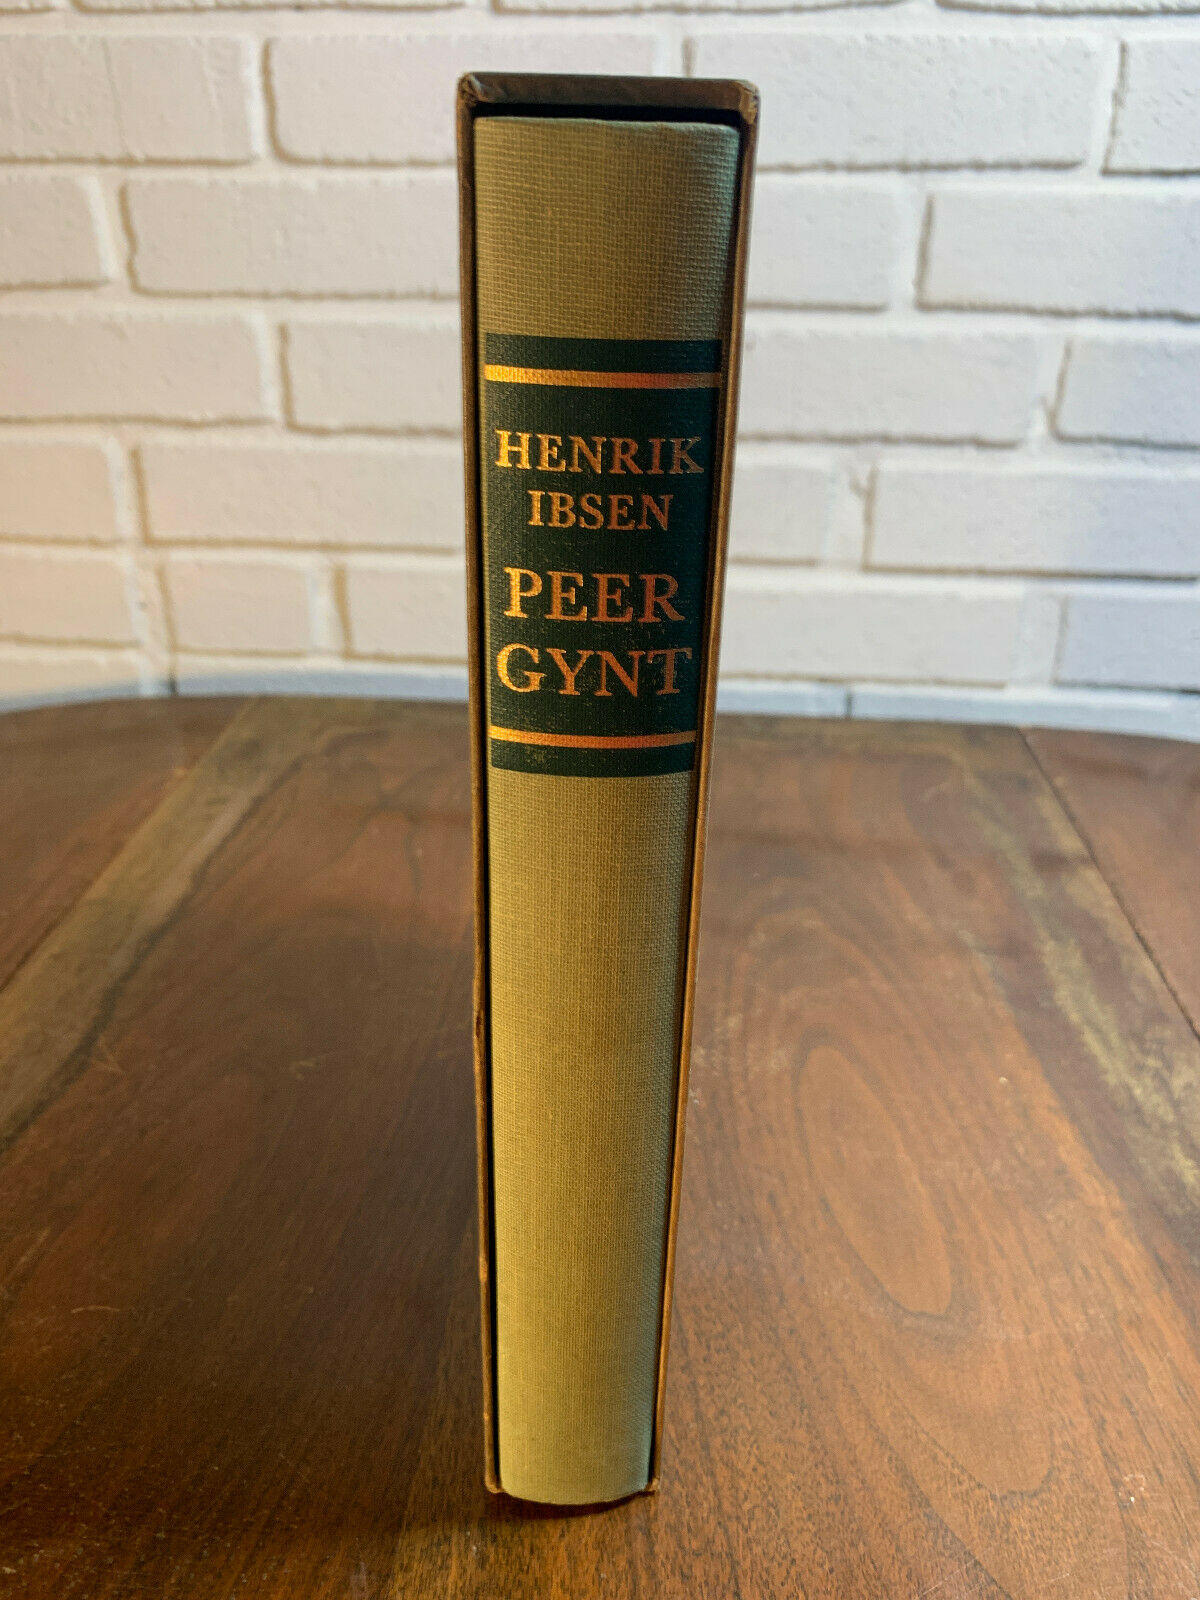 Peer Gynt by Henrik Ibsen, translated by William & Charles Archer w/ Sandglass